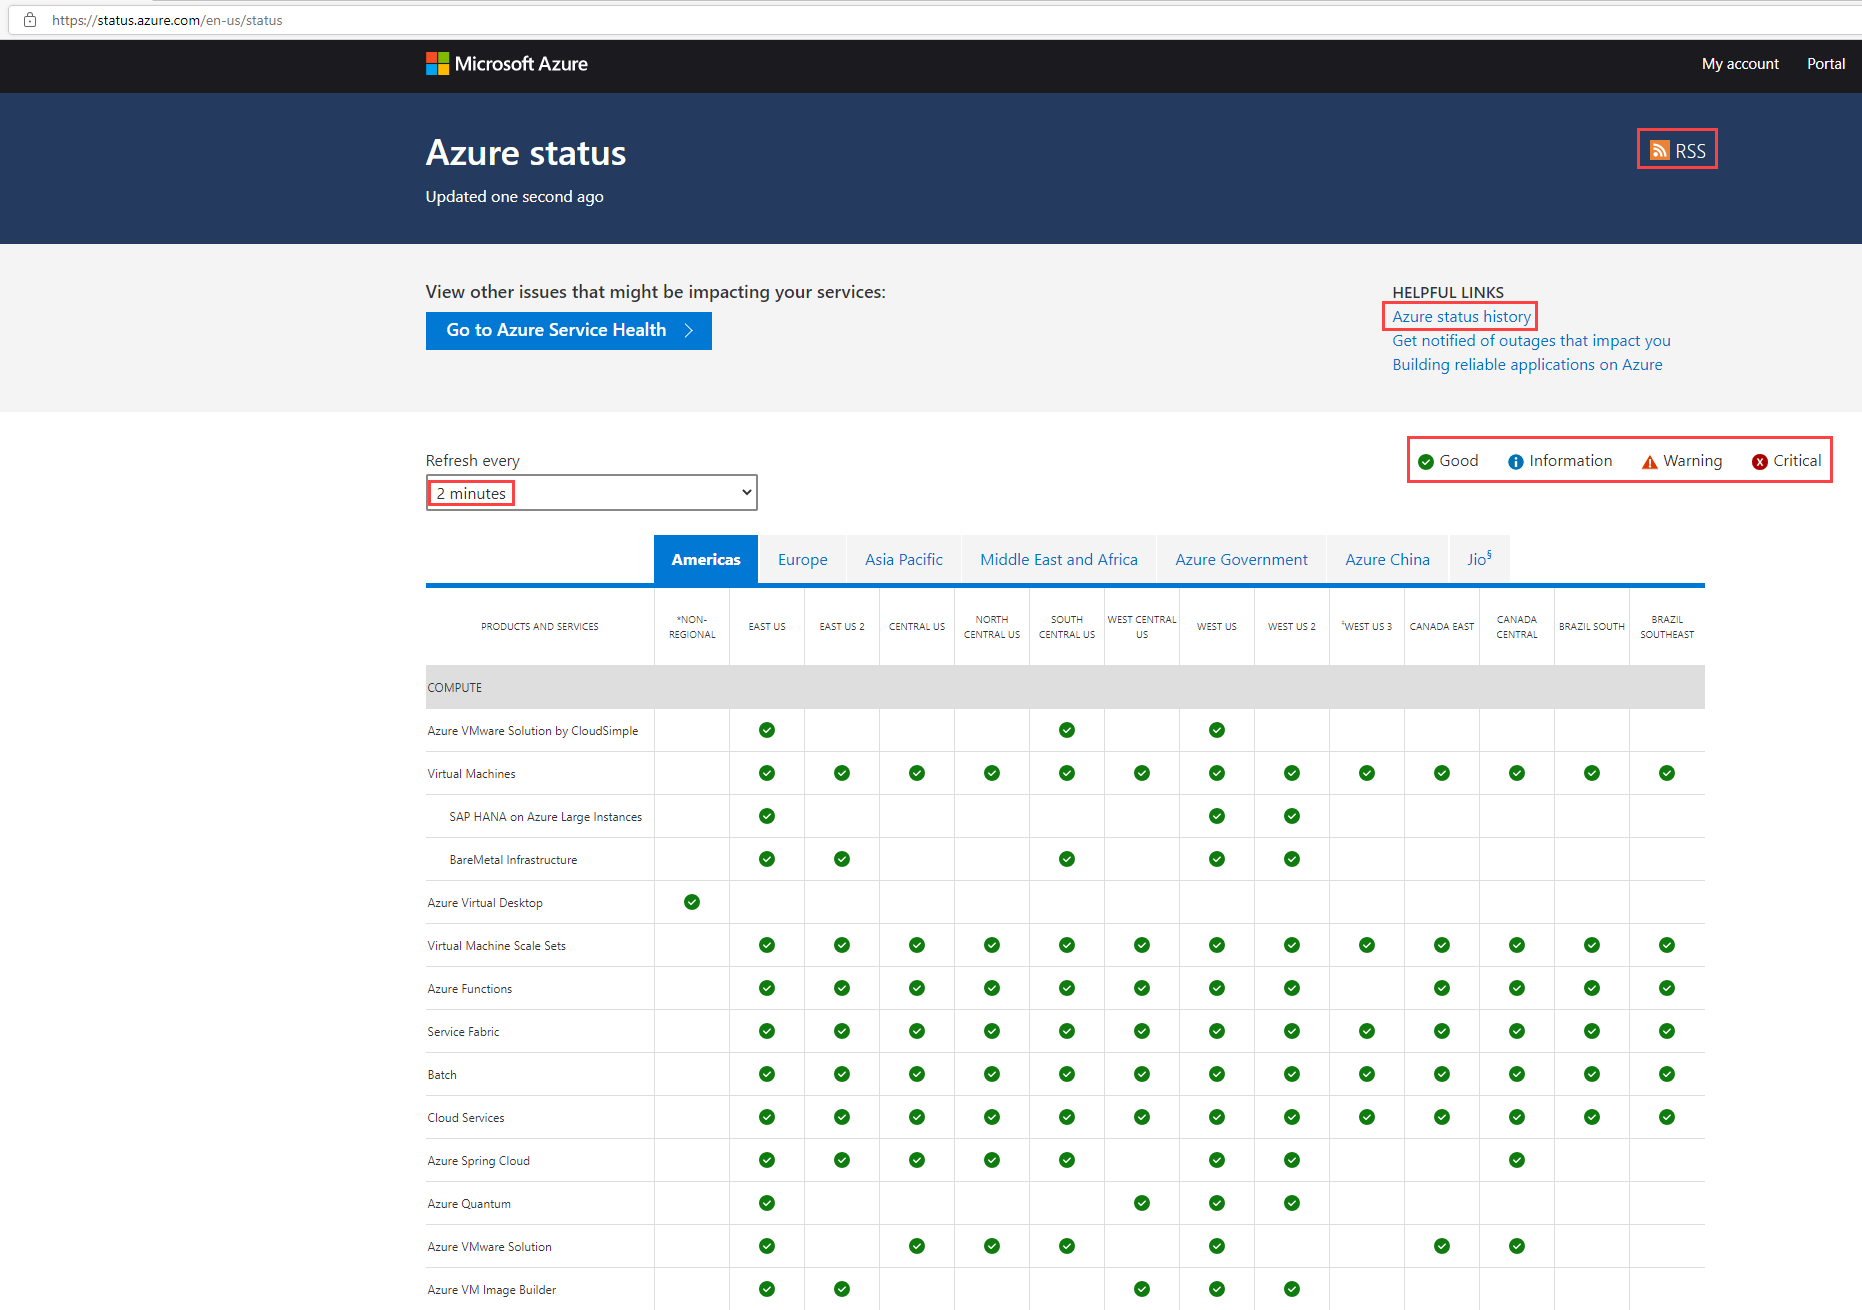 Screenshot of the Azure Service Status Page displaying the public information about the health of Azure services among the different geographies.